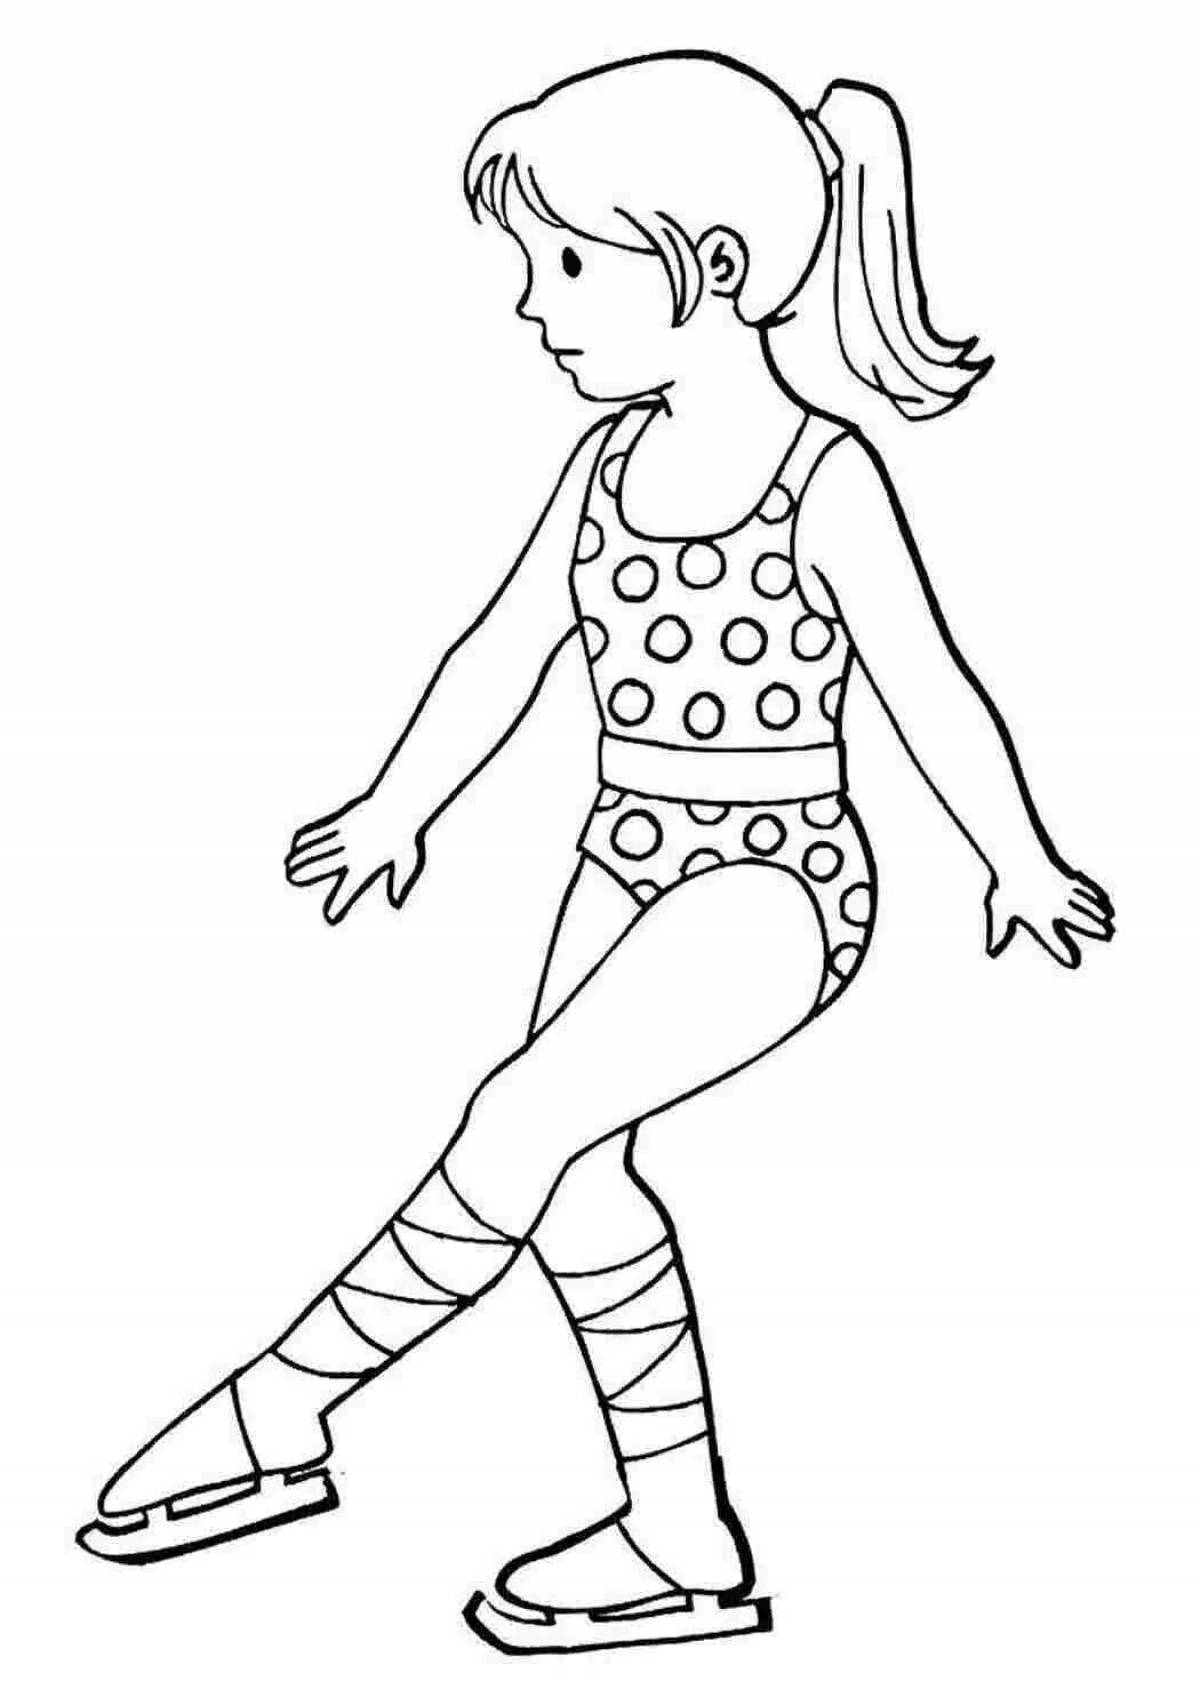 Nice people coloring pages for girls